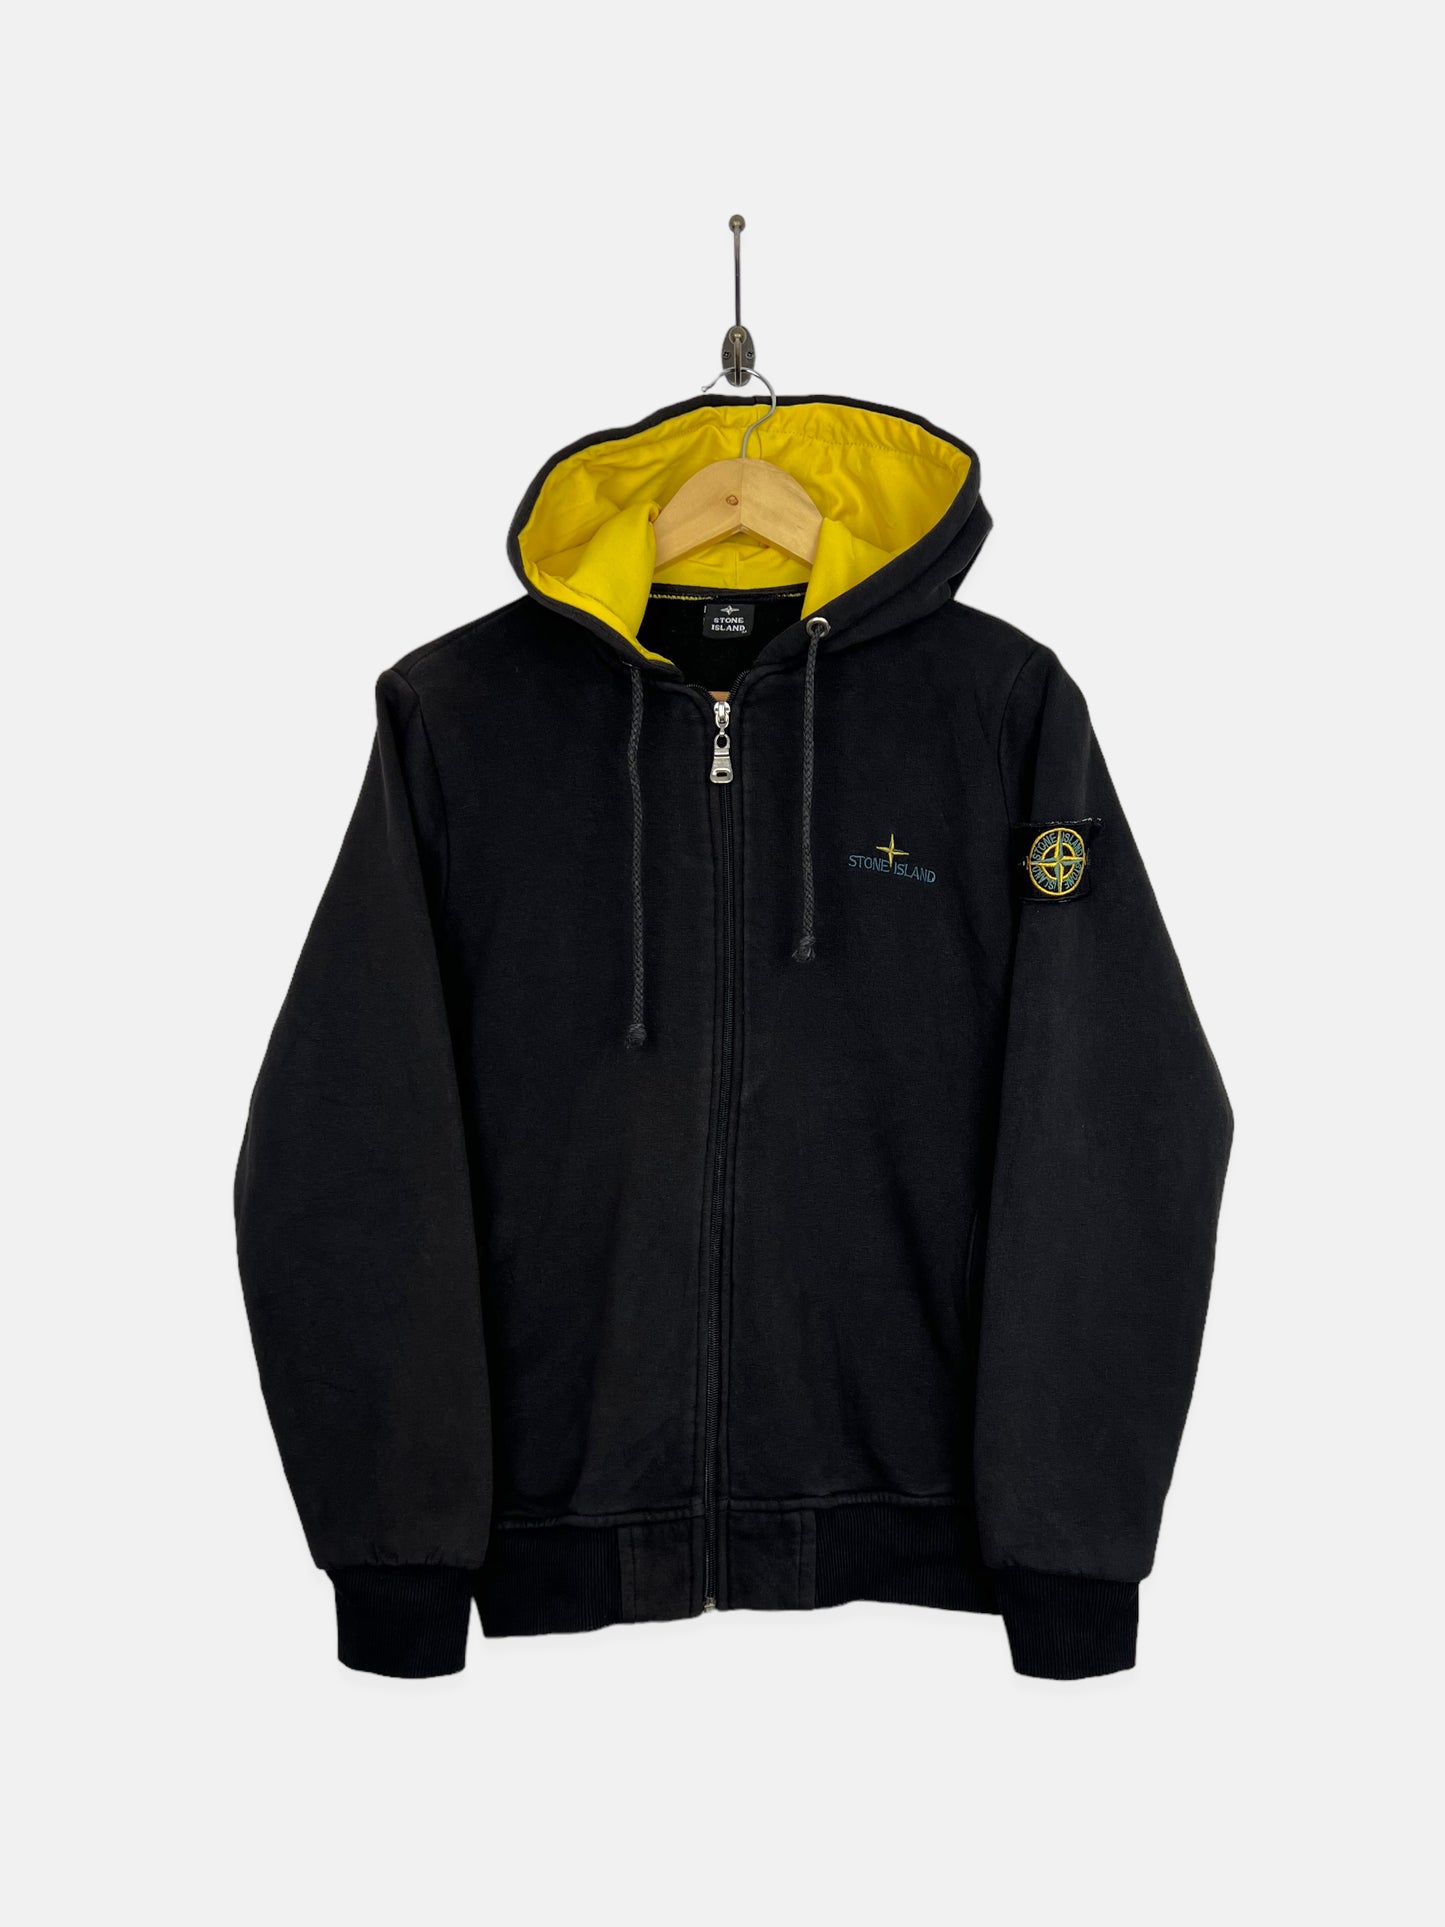 Stone Island Embroidered Vintage Zip-Up Hoodie Size 8